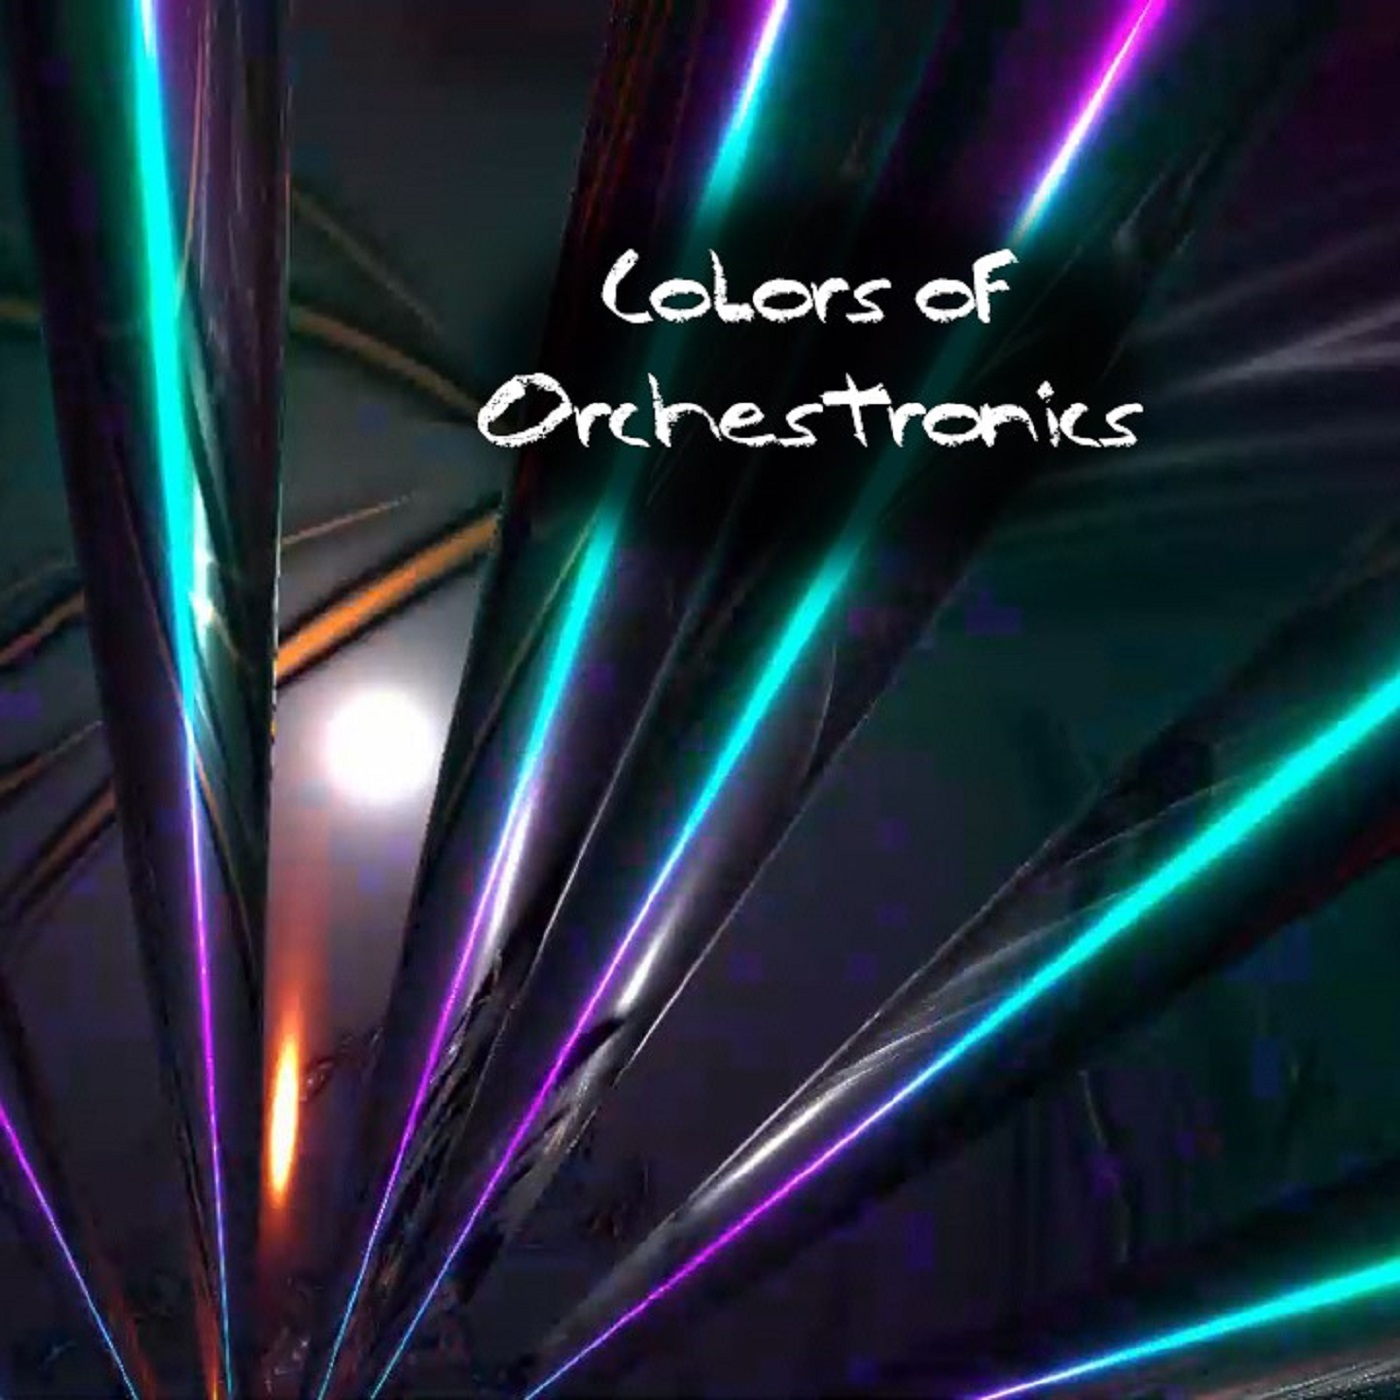 Album: Keyboard Orchestra by Orchestronics